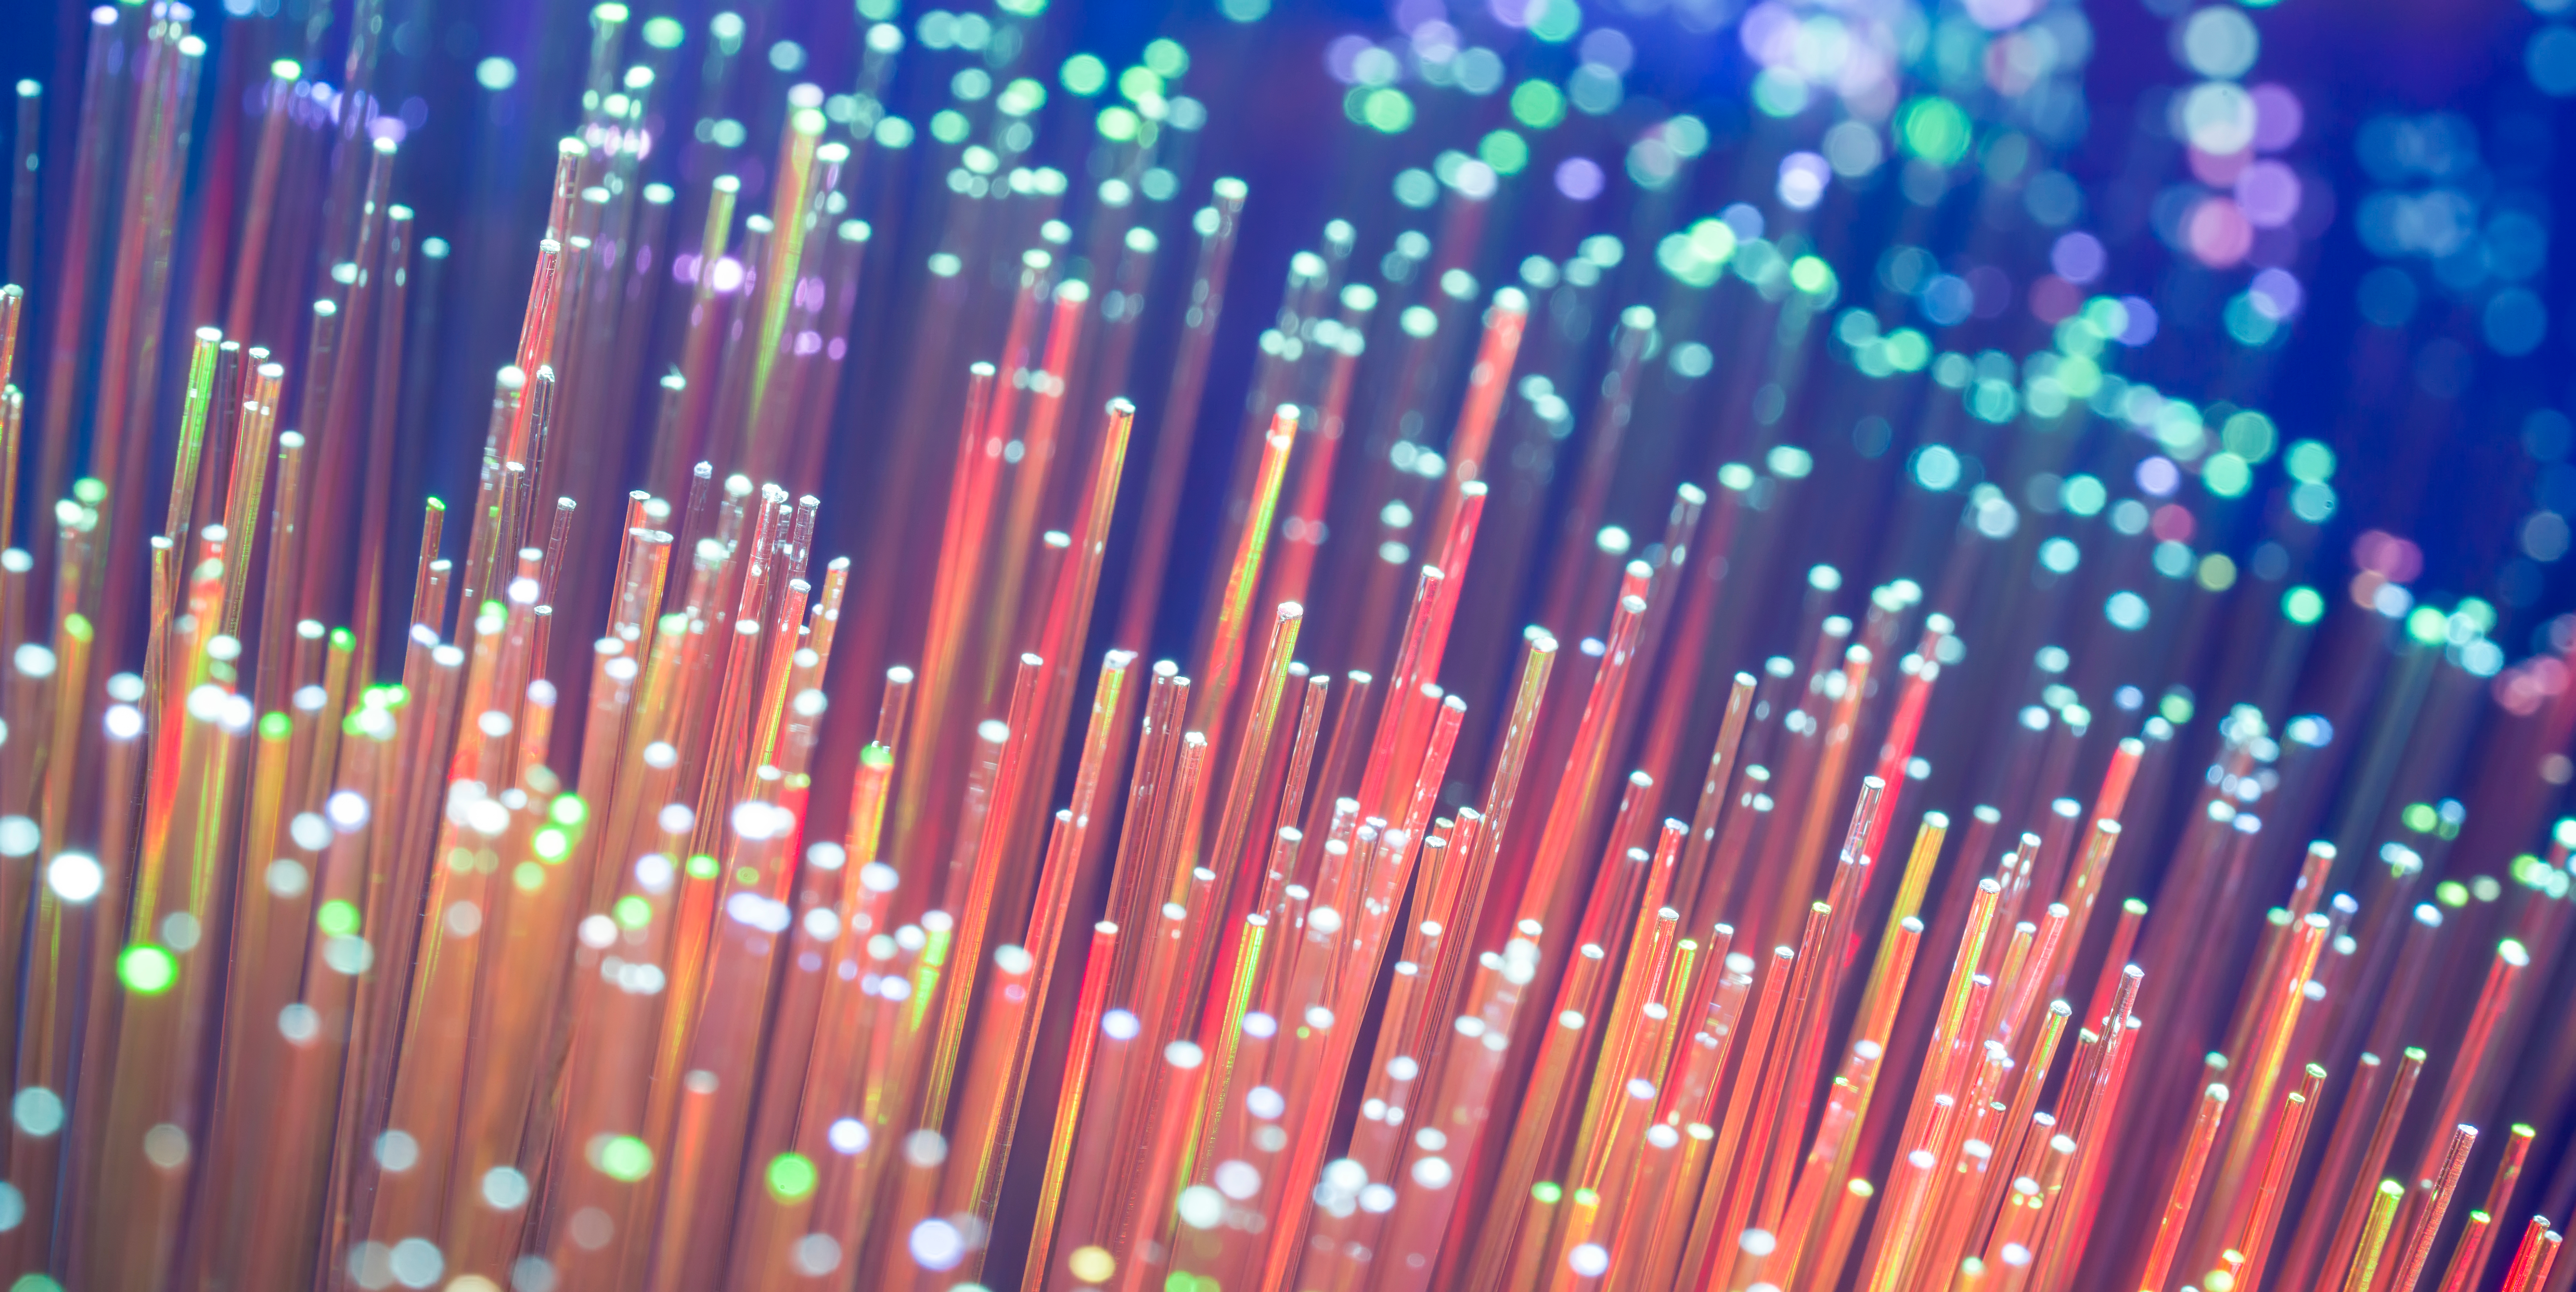 Abstract,Background,Of,Fiber,Optic,Cables